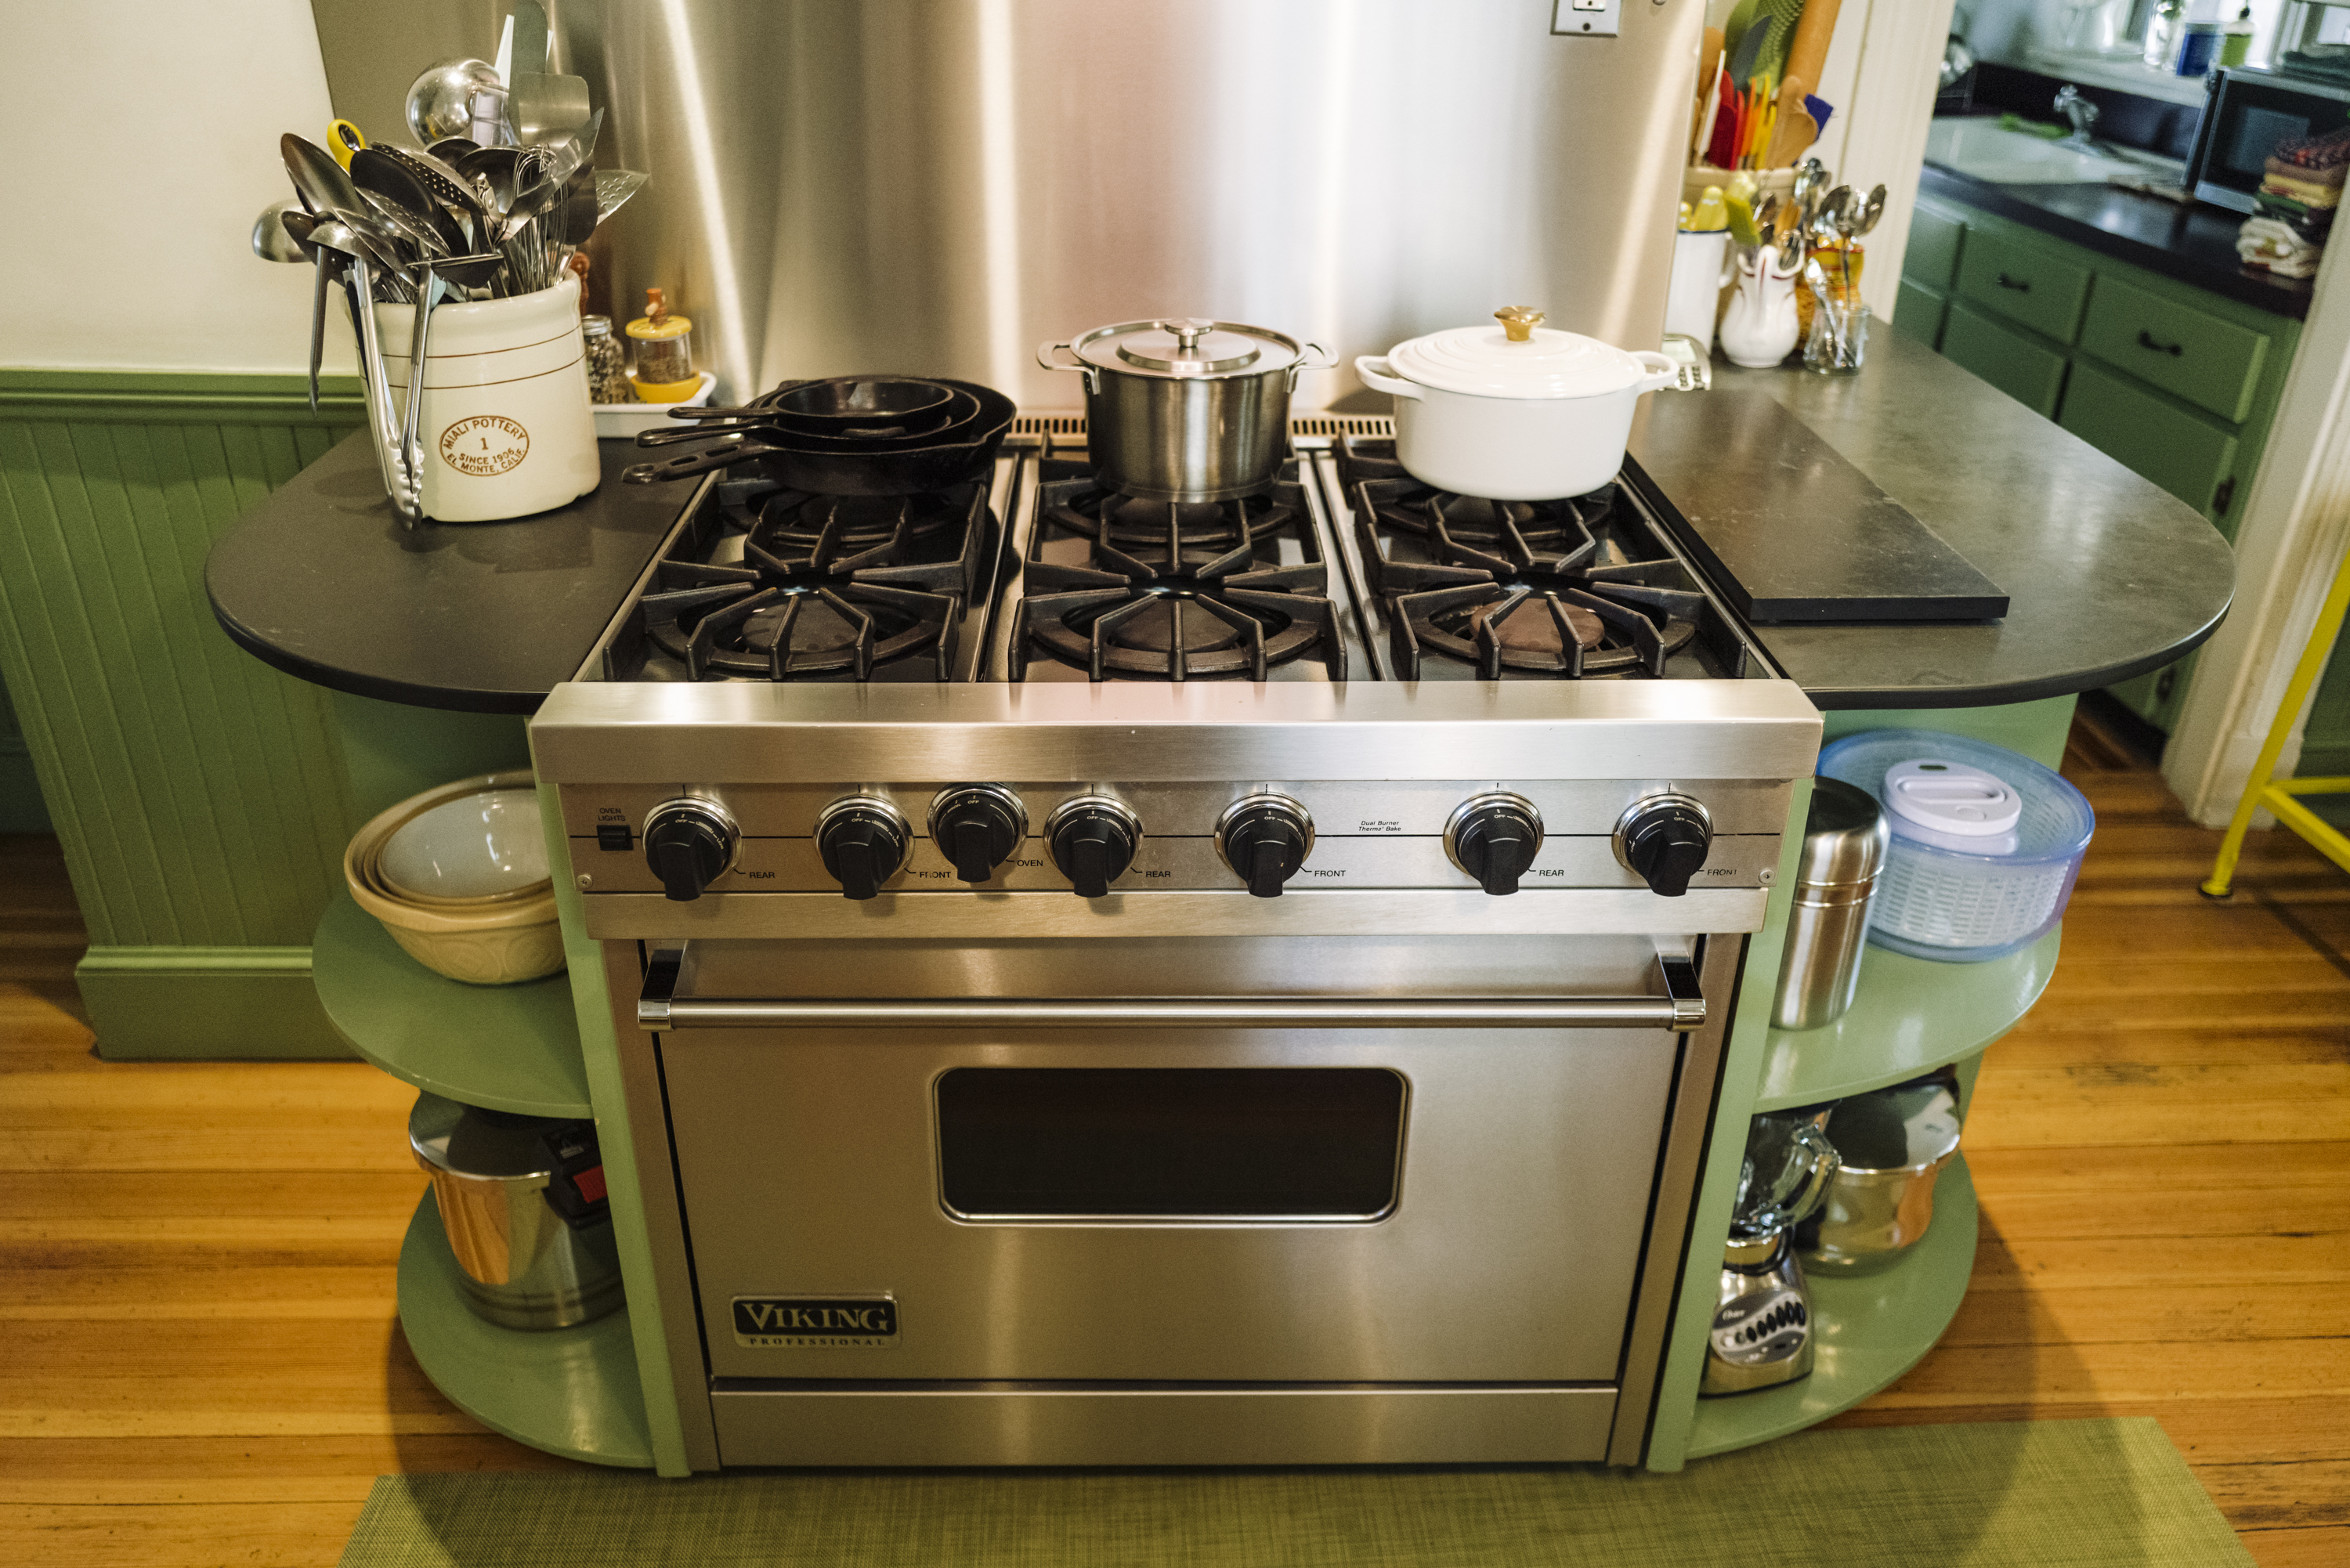 Range cooker stoves, for kitchen cooking and baking